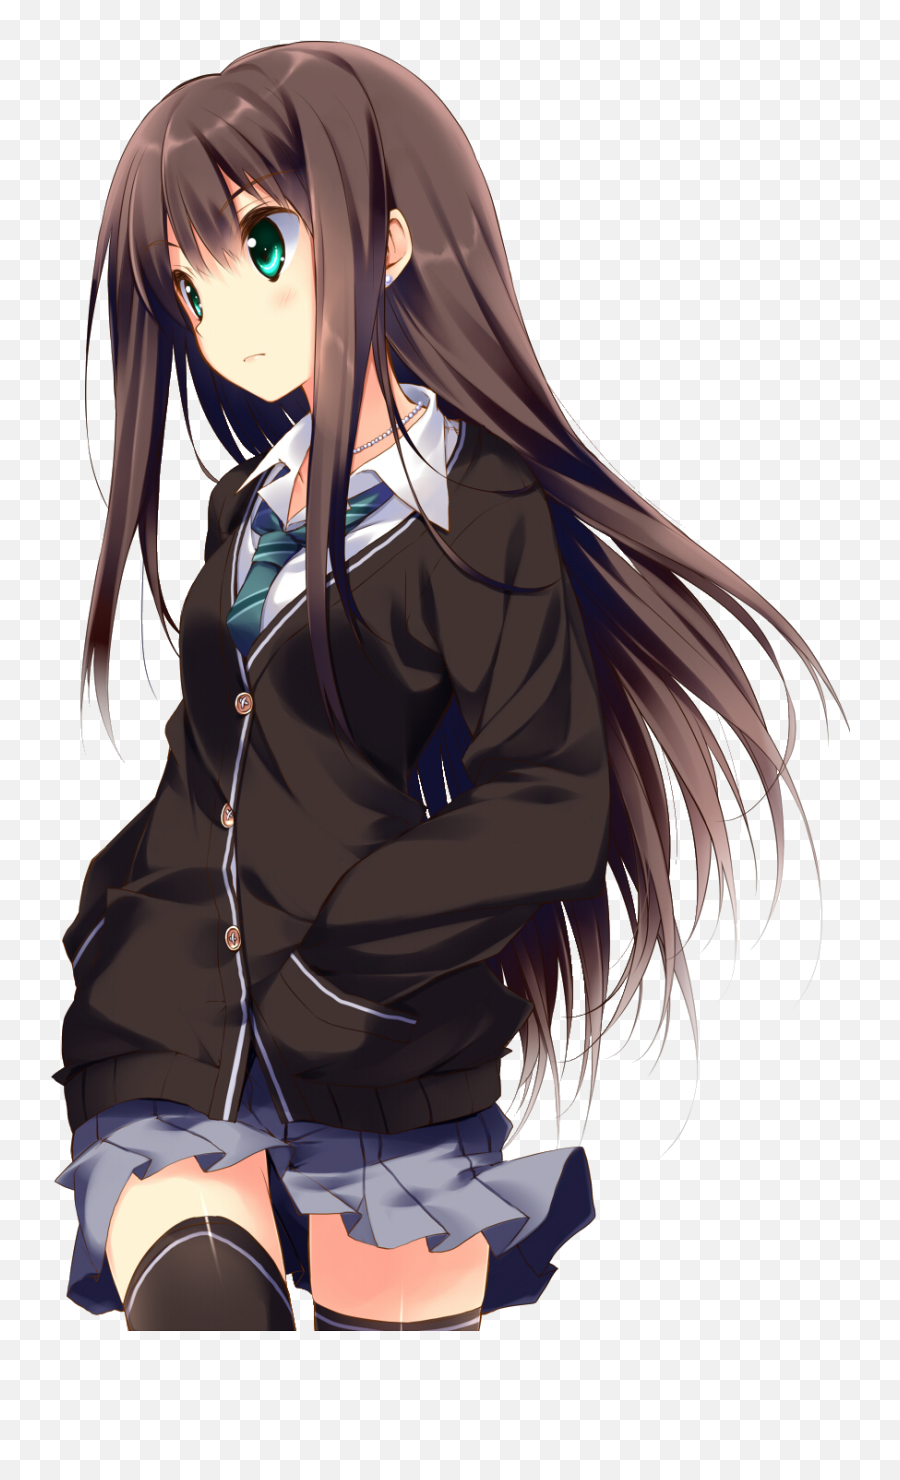 Pin On Anime Characters Anime Render - Brown Hair Cute Anime Girl Emoji,Neir Why Are Emotions Prohibited